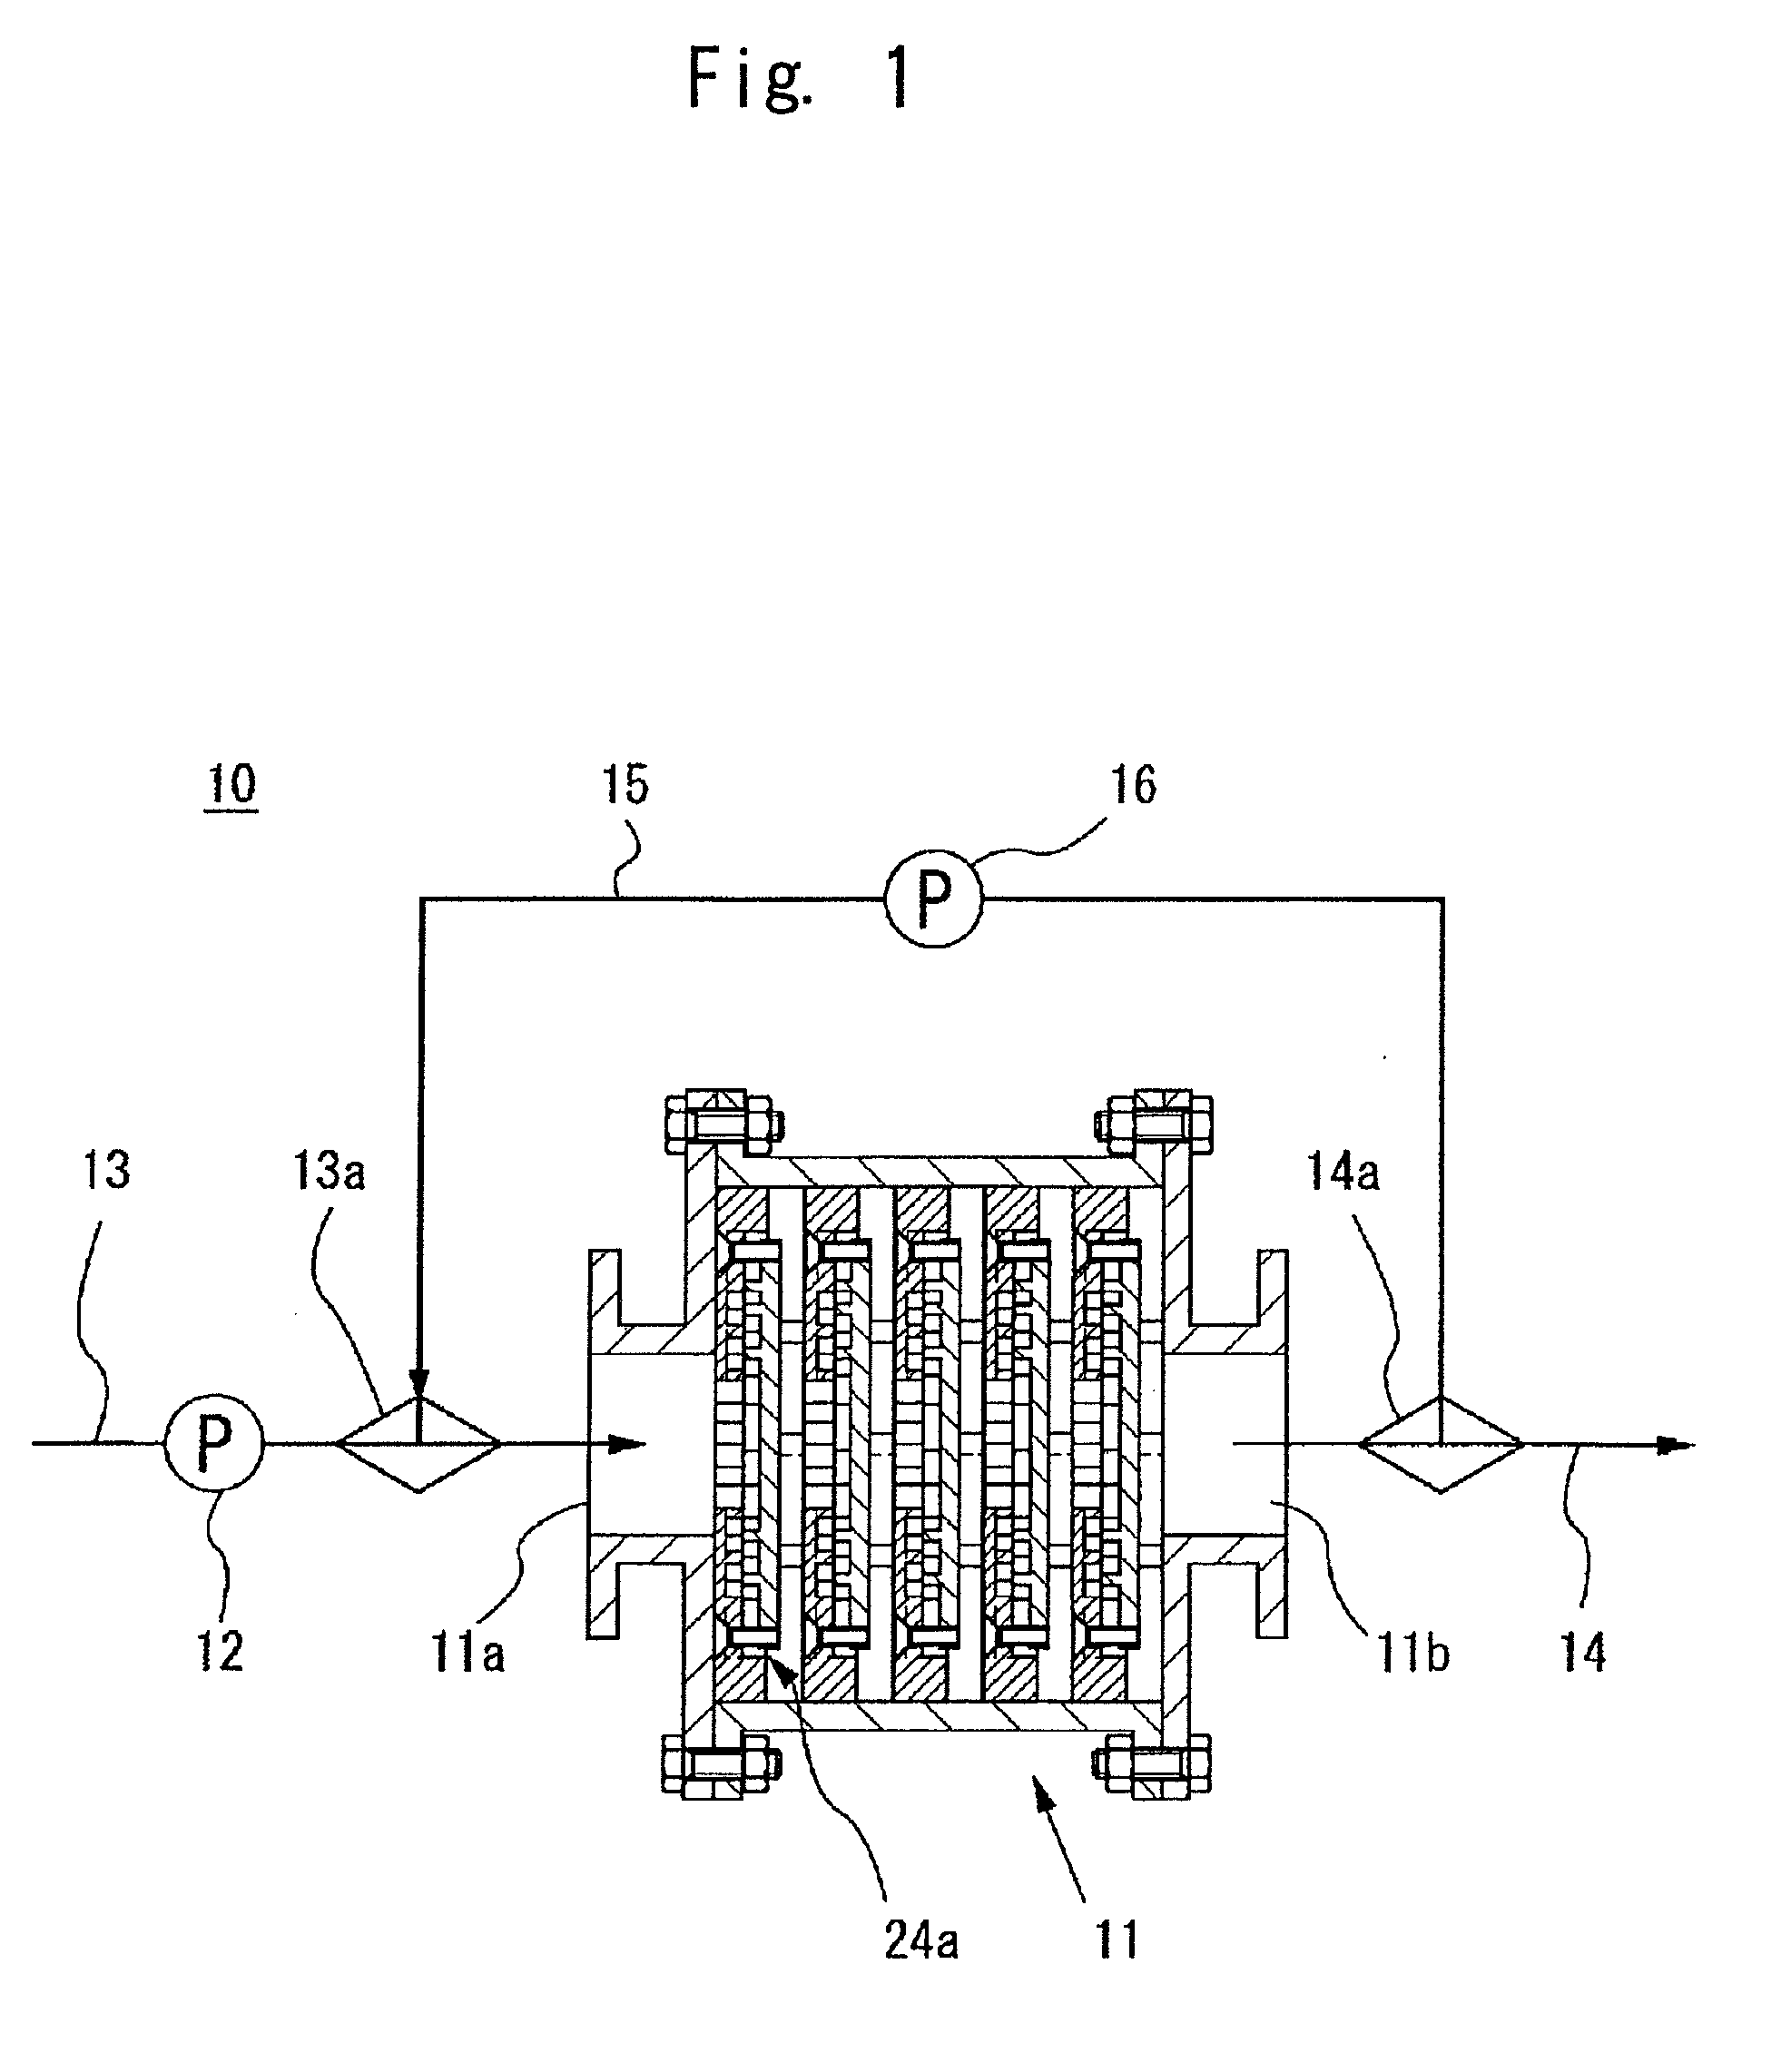 Static fluid mixer capable of ultrafinely mixing fluids